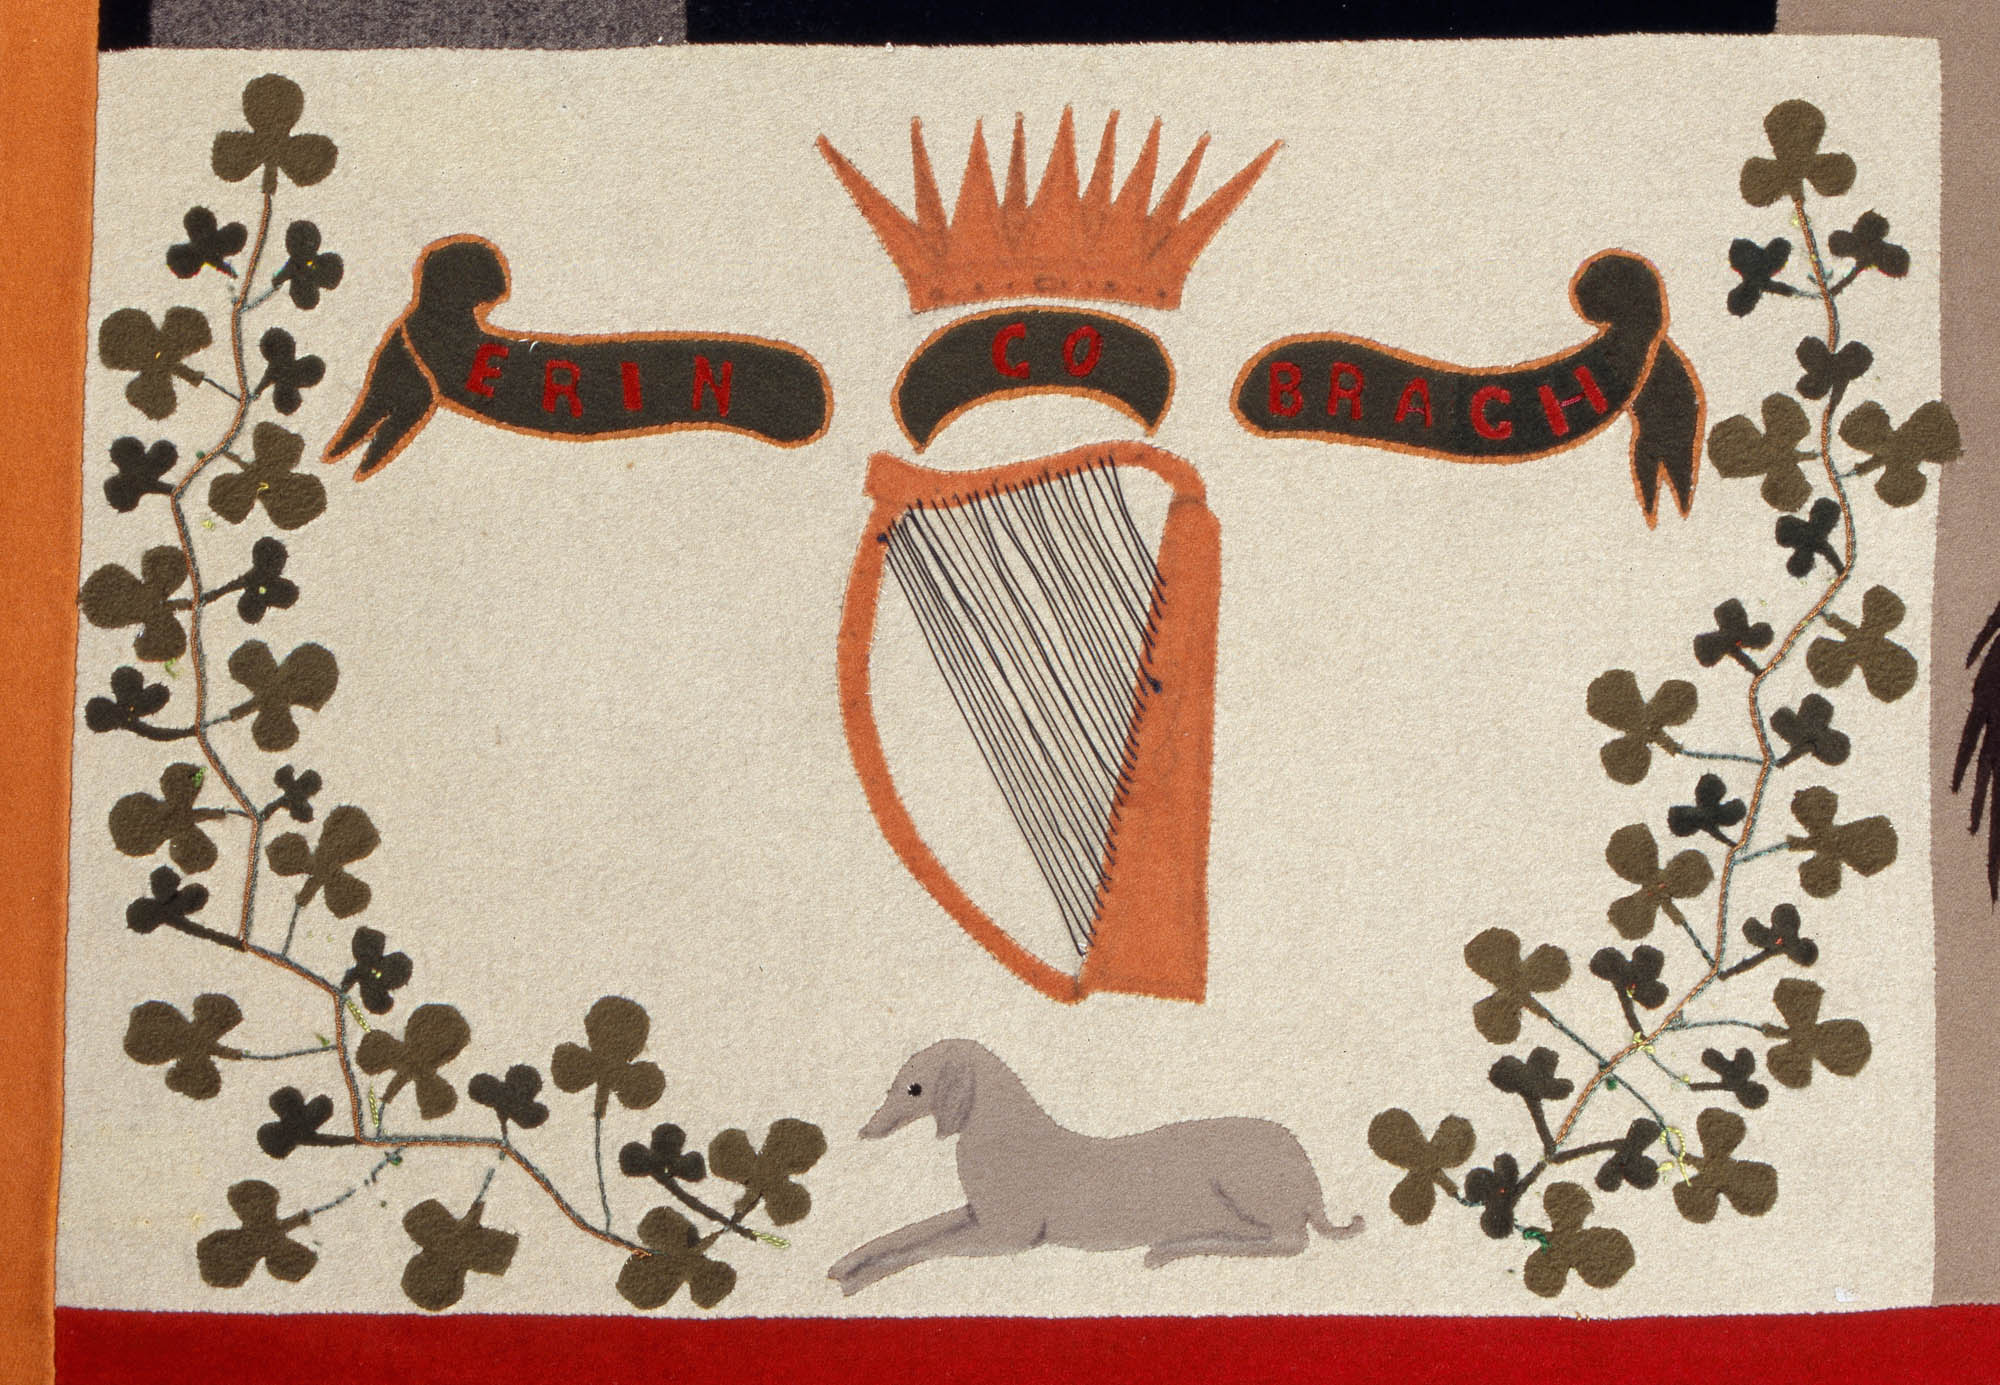 Close-up of a panel on the Stokes Tapestry depicting a harp and crown in the middle with springs of shamrocks on either side. There is a banner that reads "Erin Go Bragh" in the middle and a wolfhound lying down on the bottom.